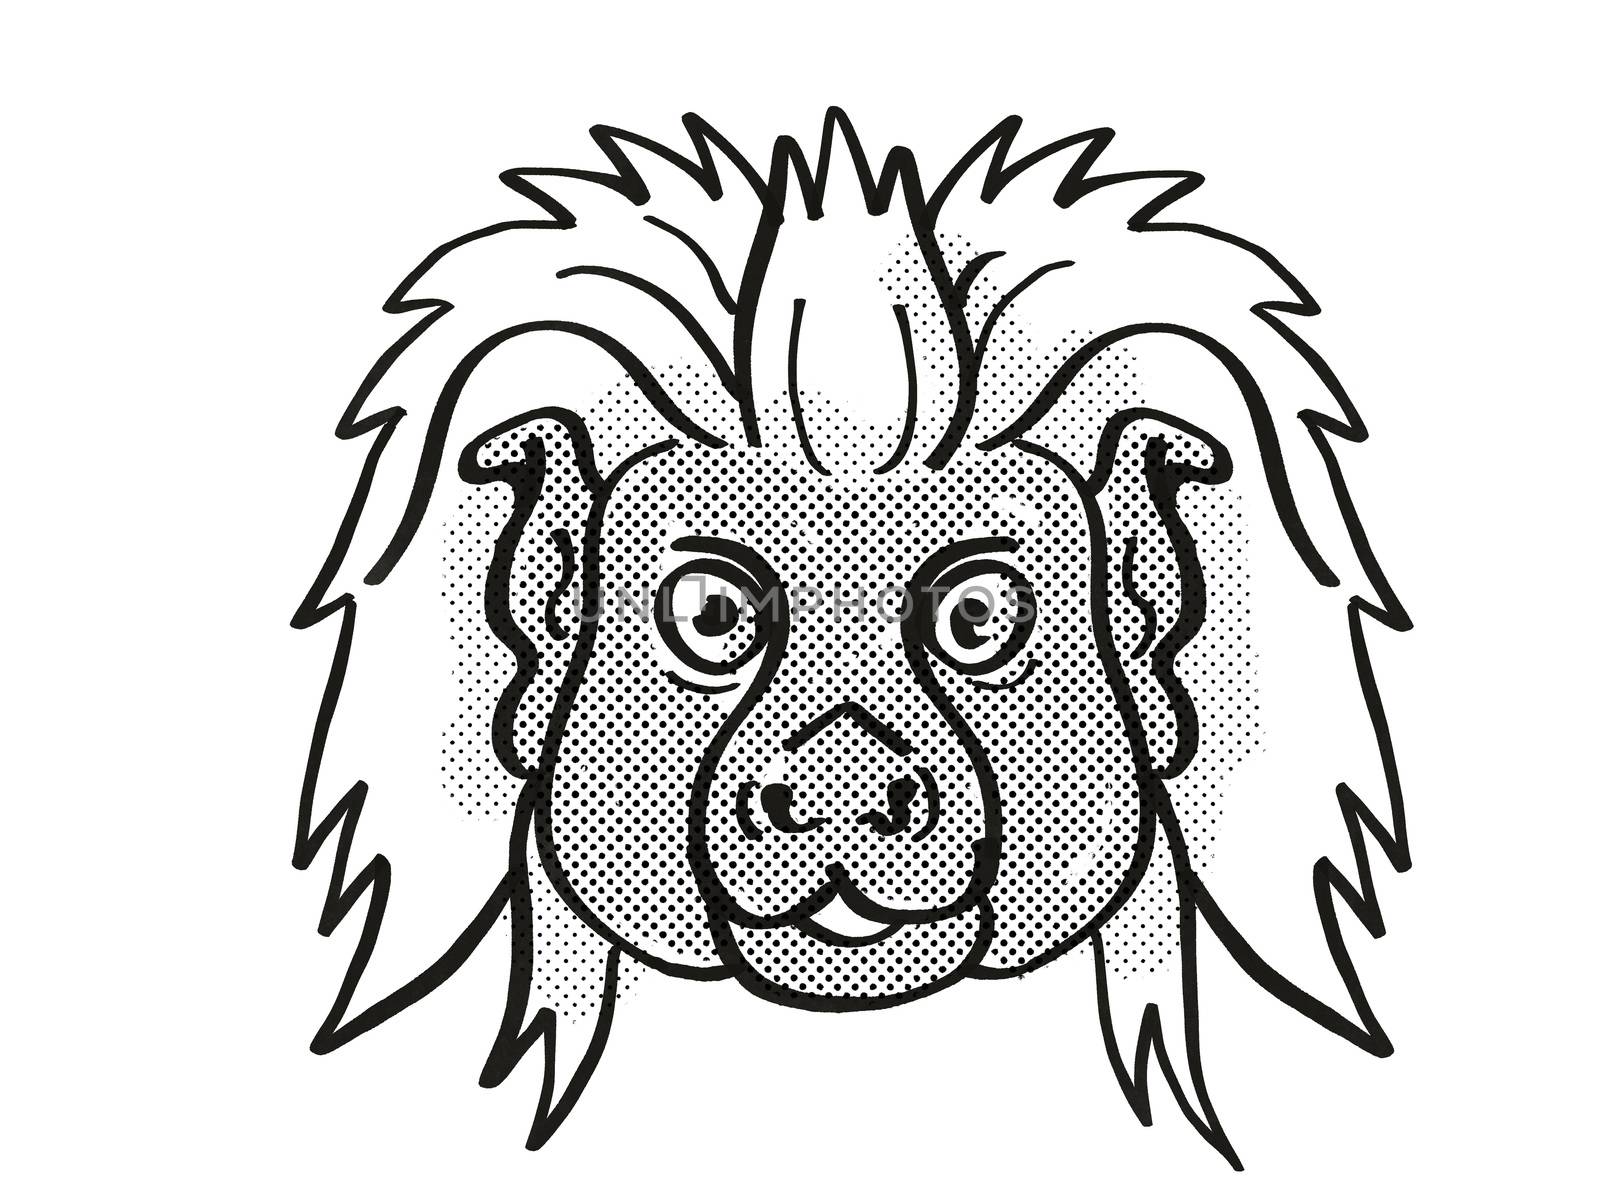 Retro cartoon mono line style drawing of head of a Cottontop tamarin, a small monkey species found in South America, an endangered wildlife species on isolated white background done in black and white.